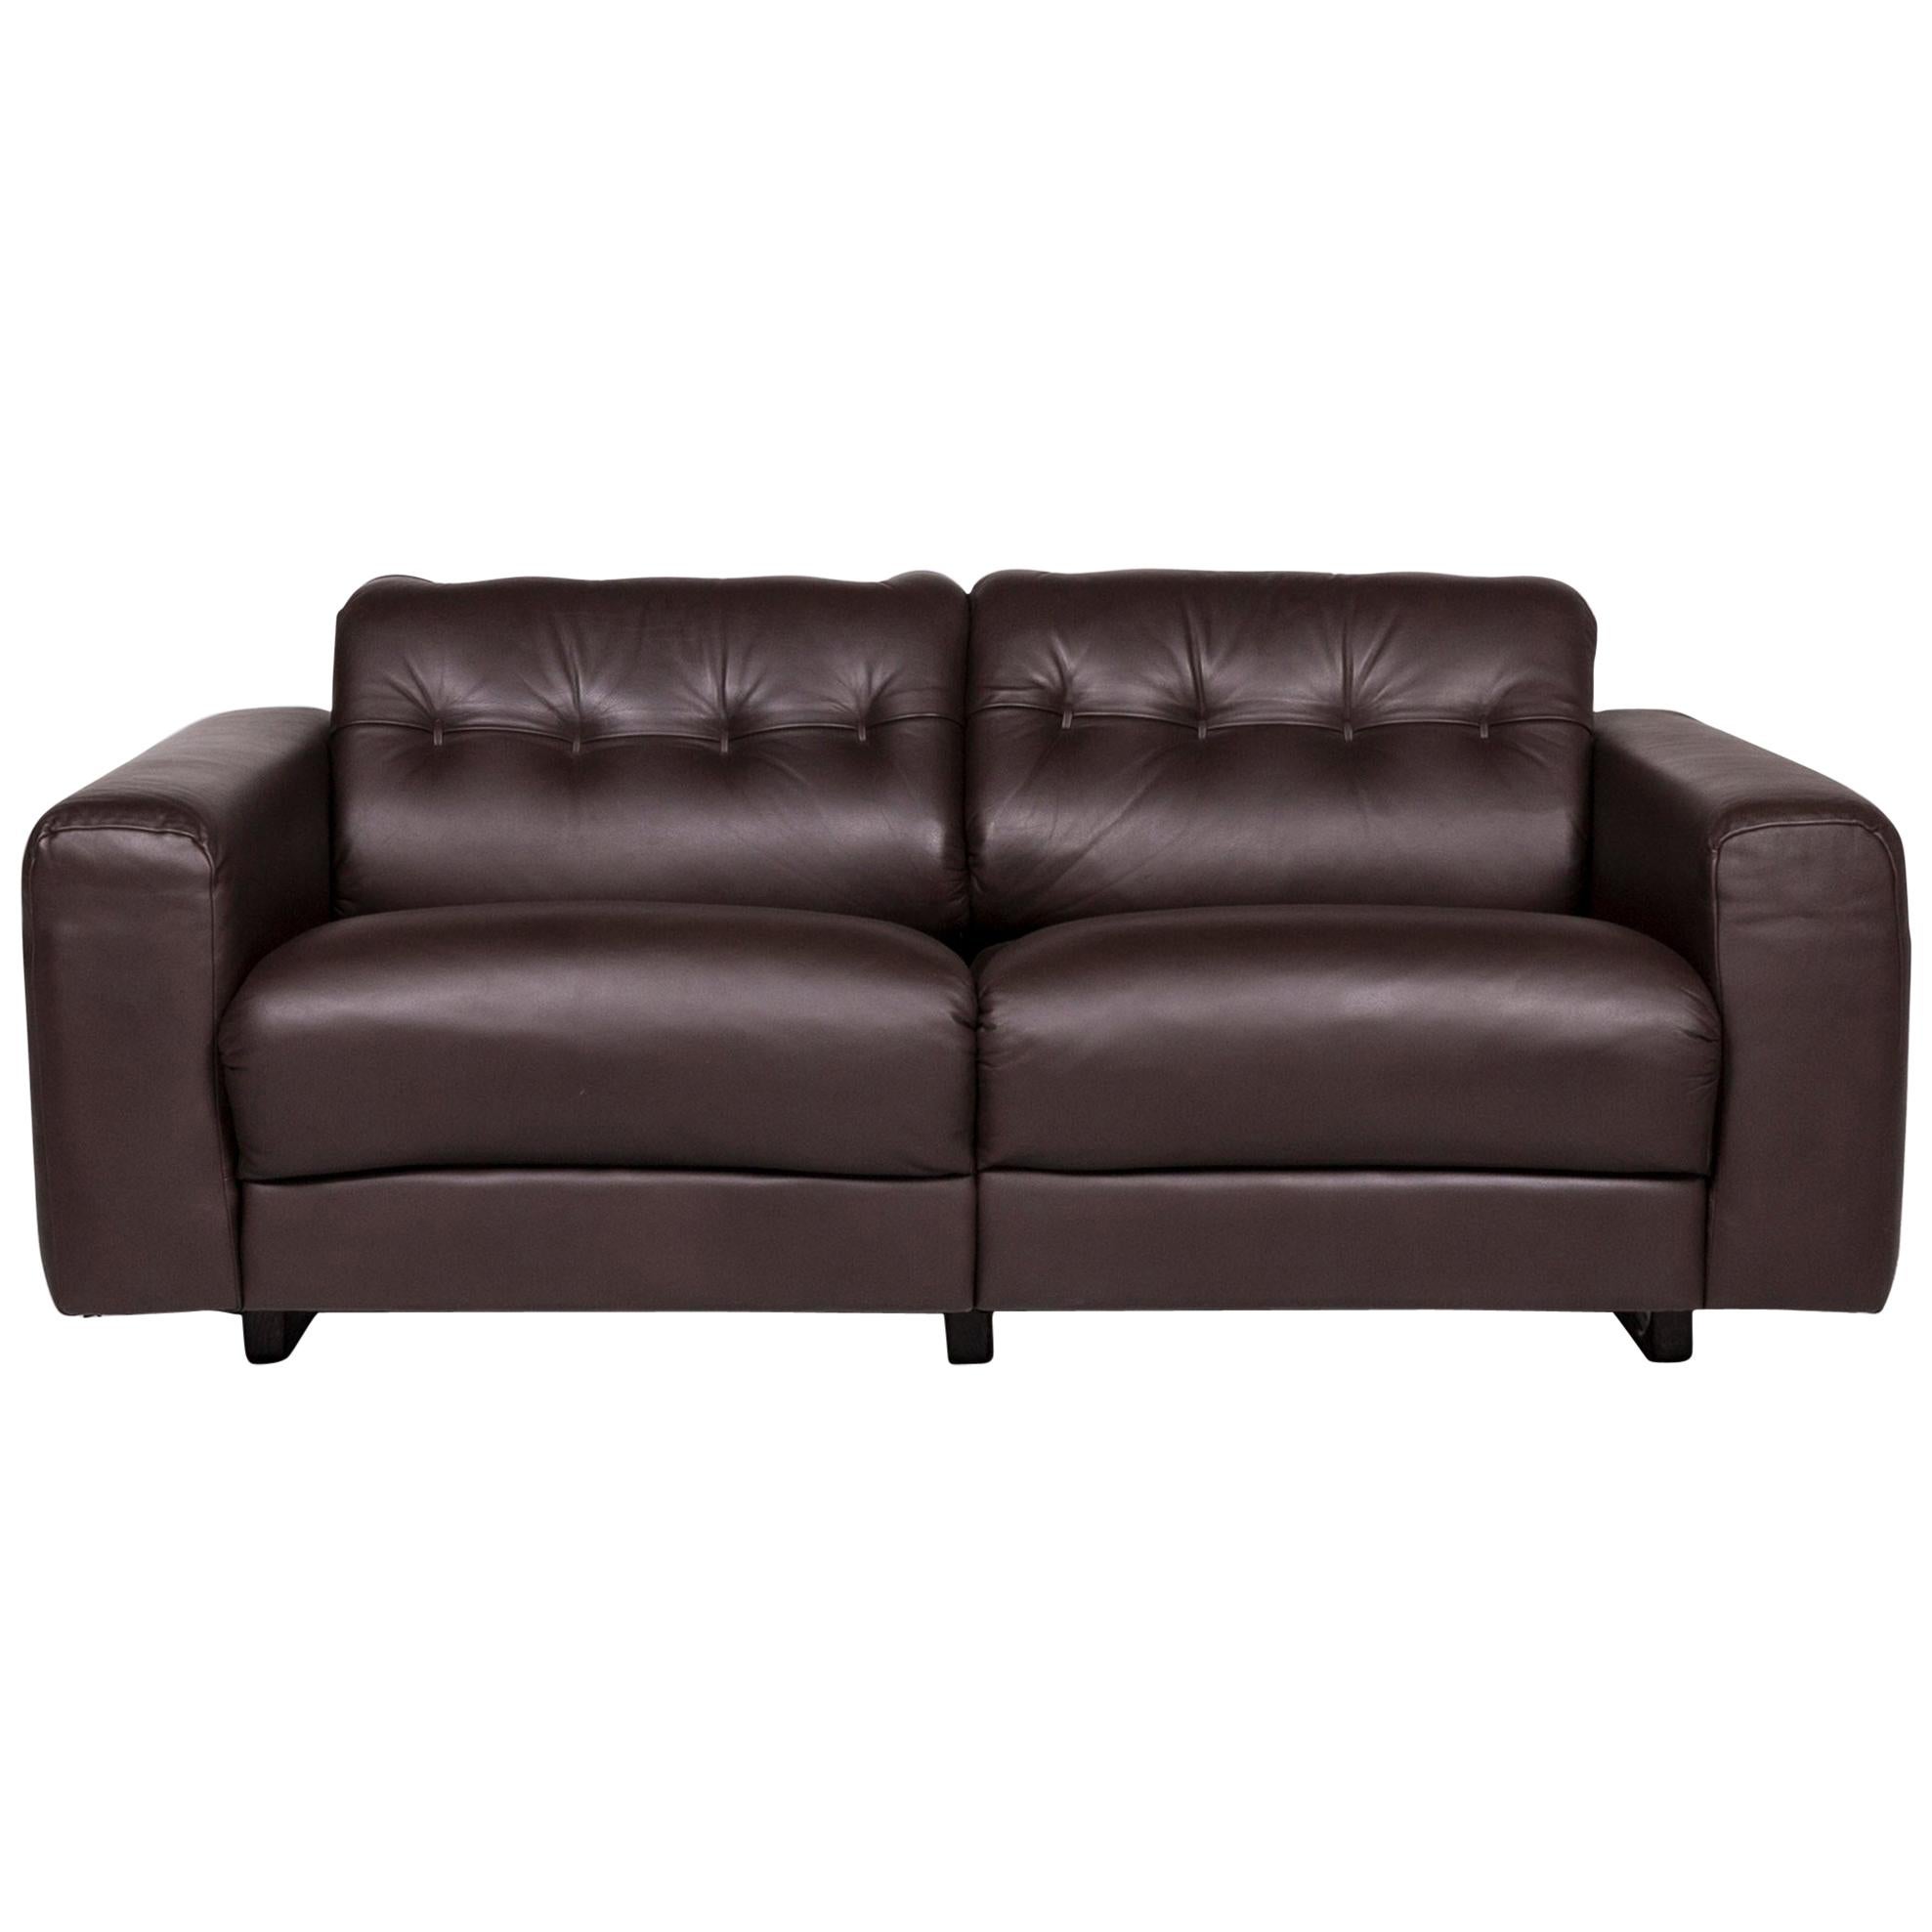 De Sede Leather Sofa Brown Two-Seat Couch